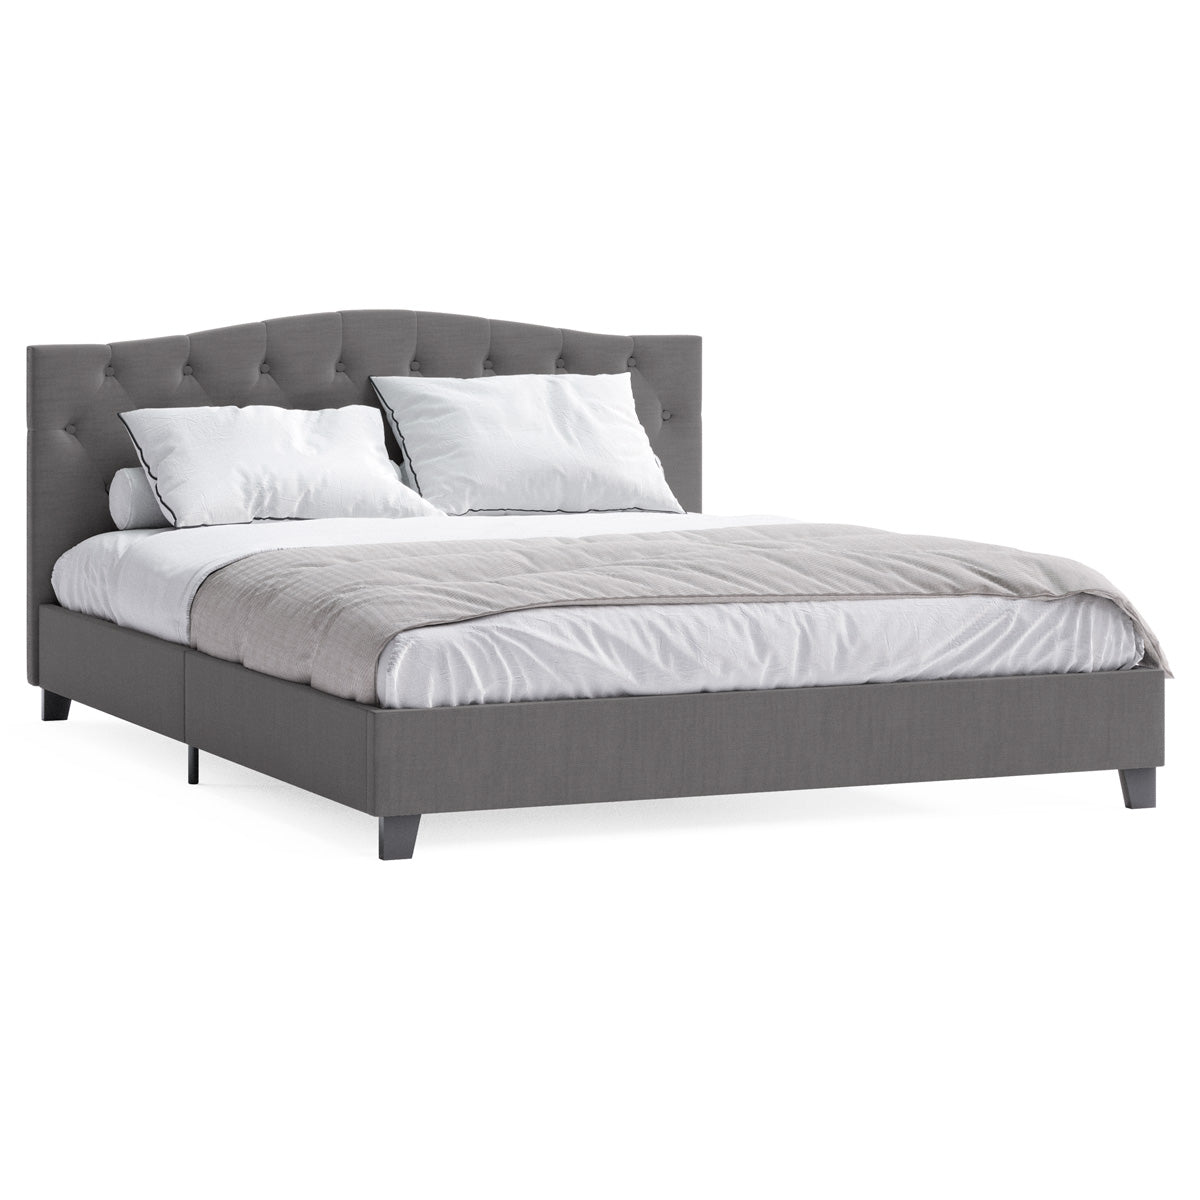 Sonata Fabric Curved Bed Frame (Charcoal)